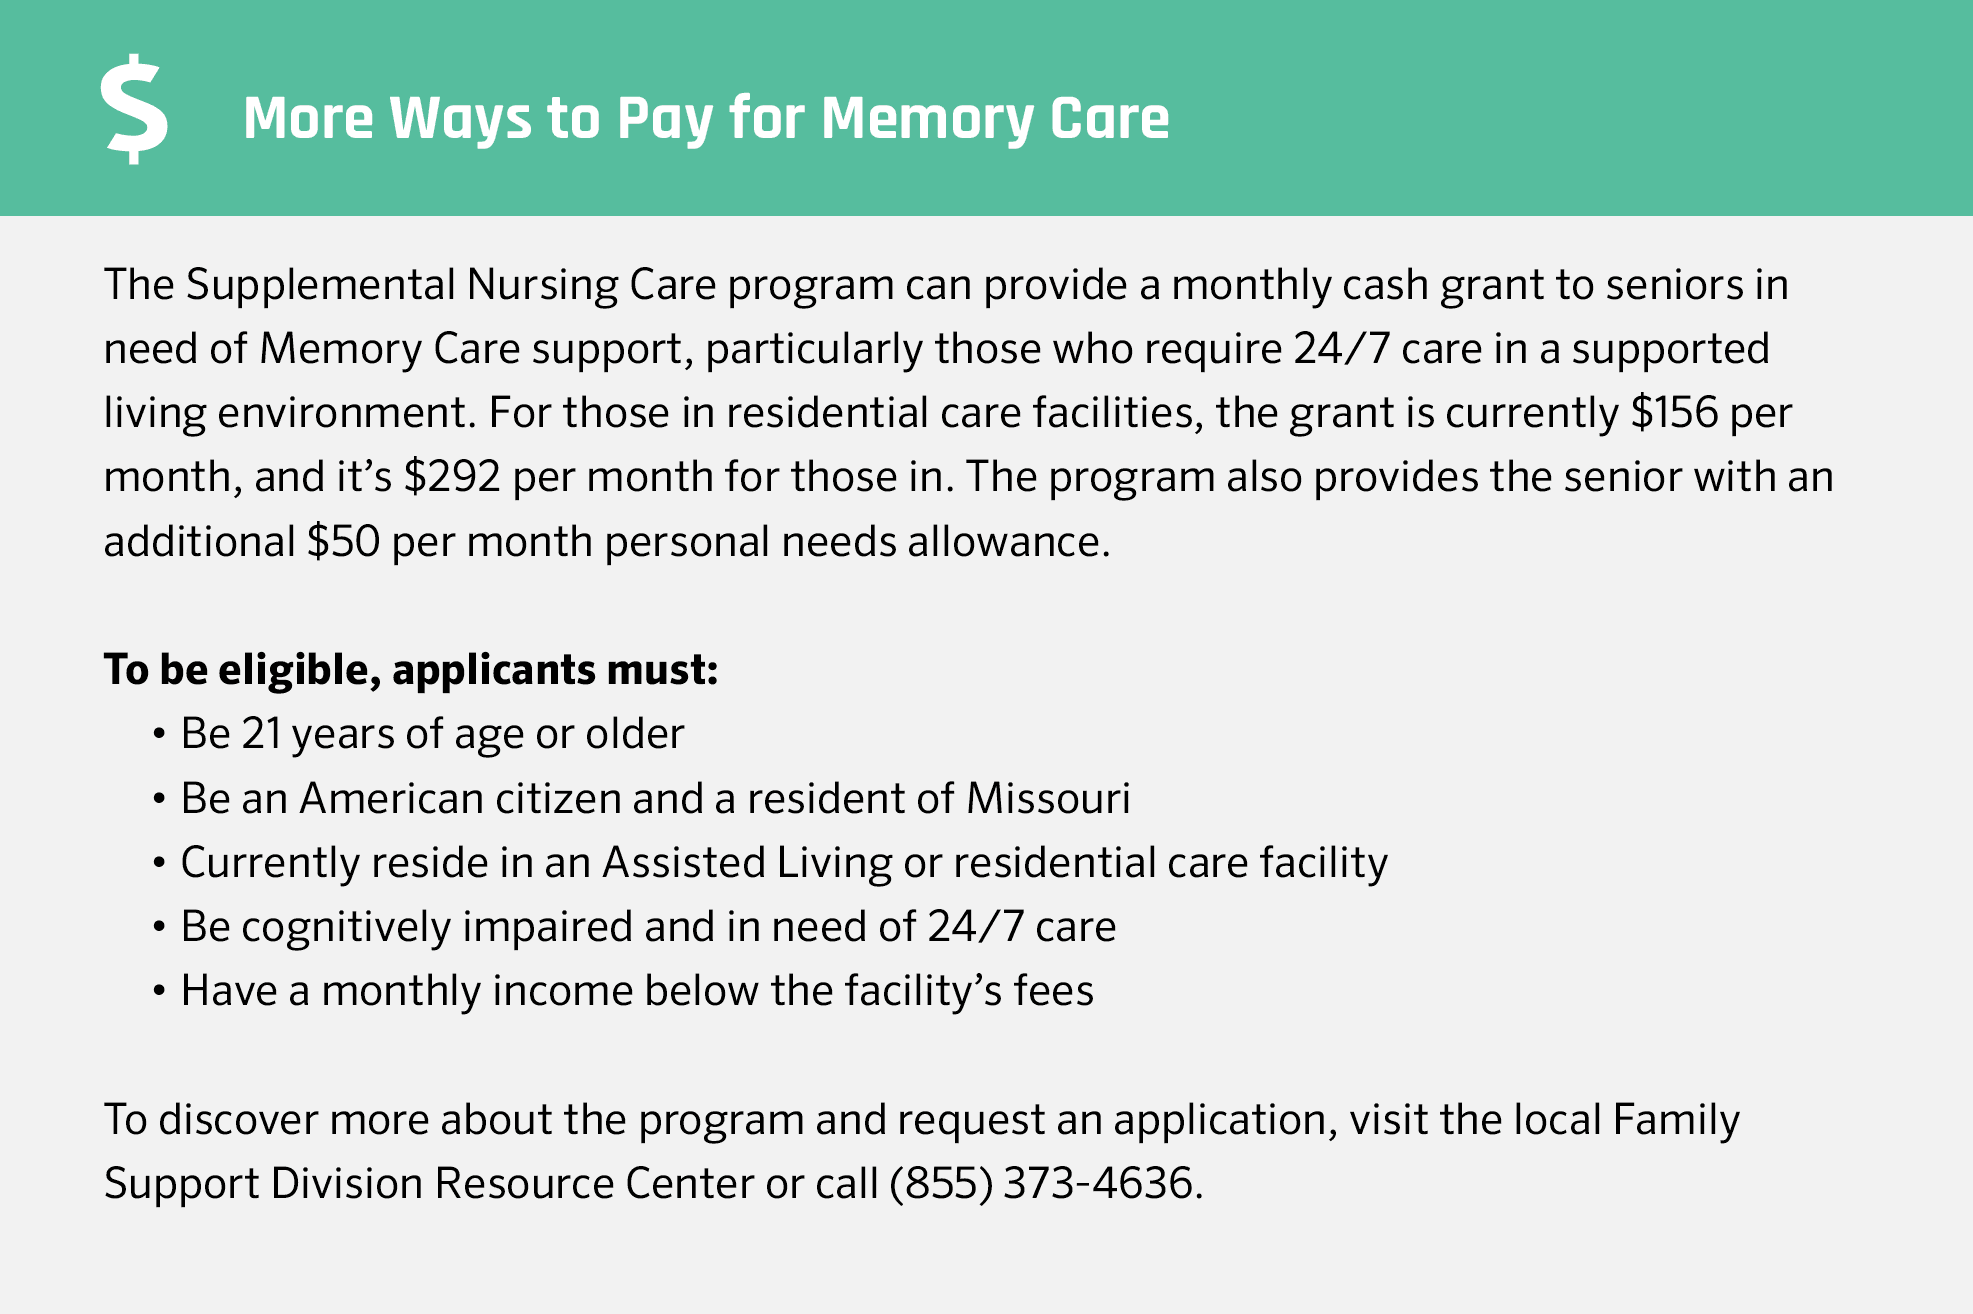 More ways to pay for memory care in Missouri